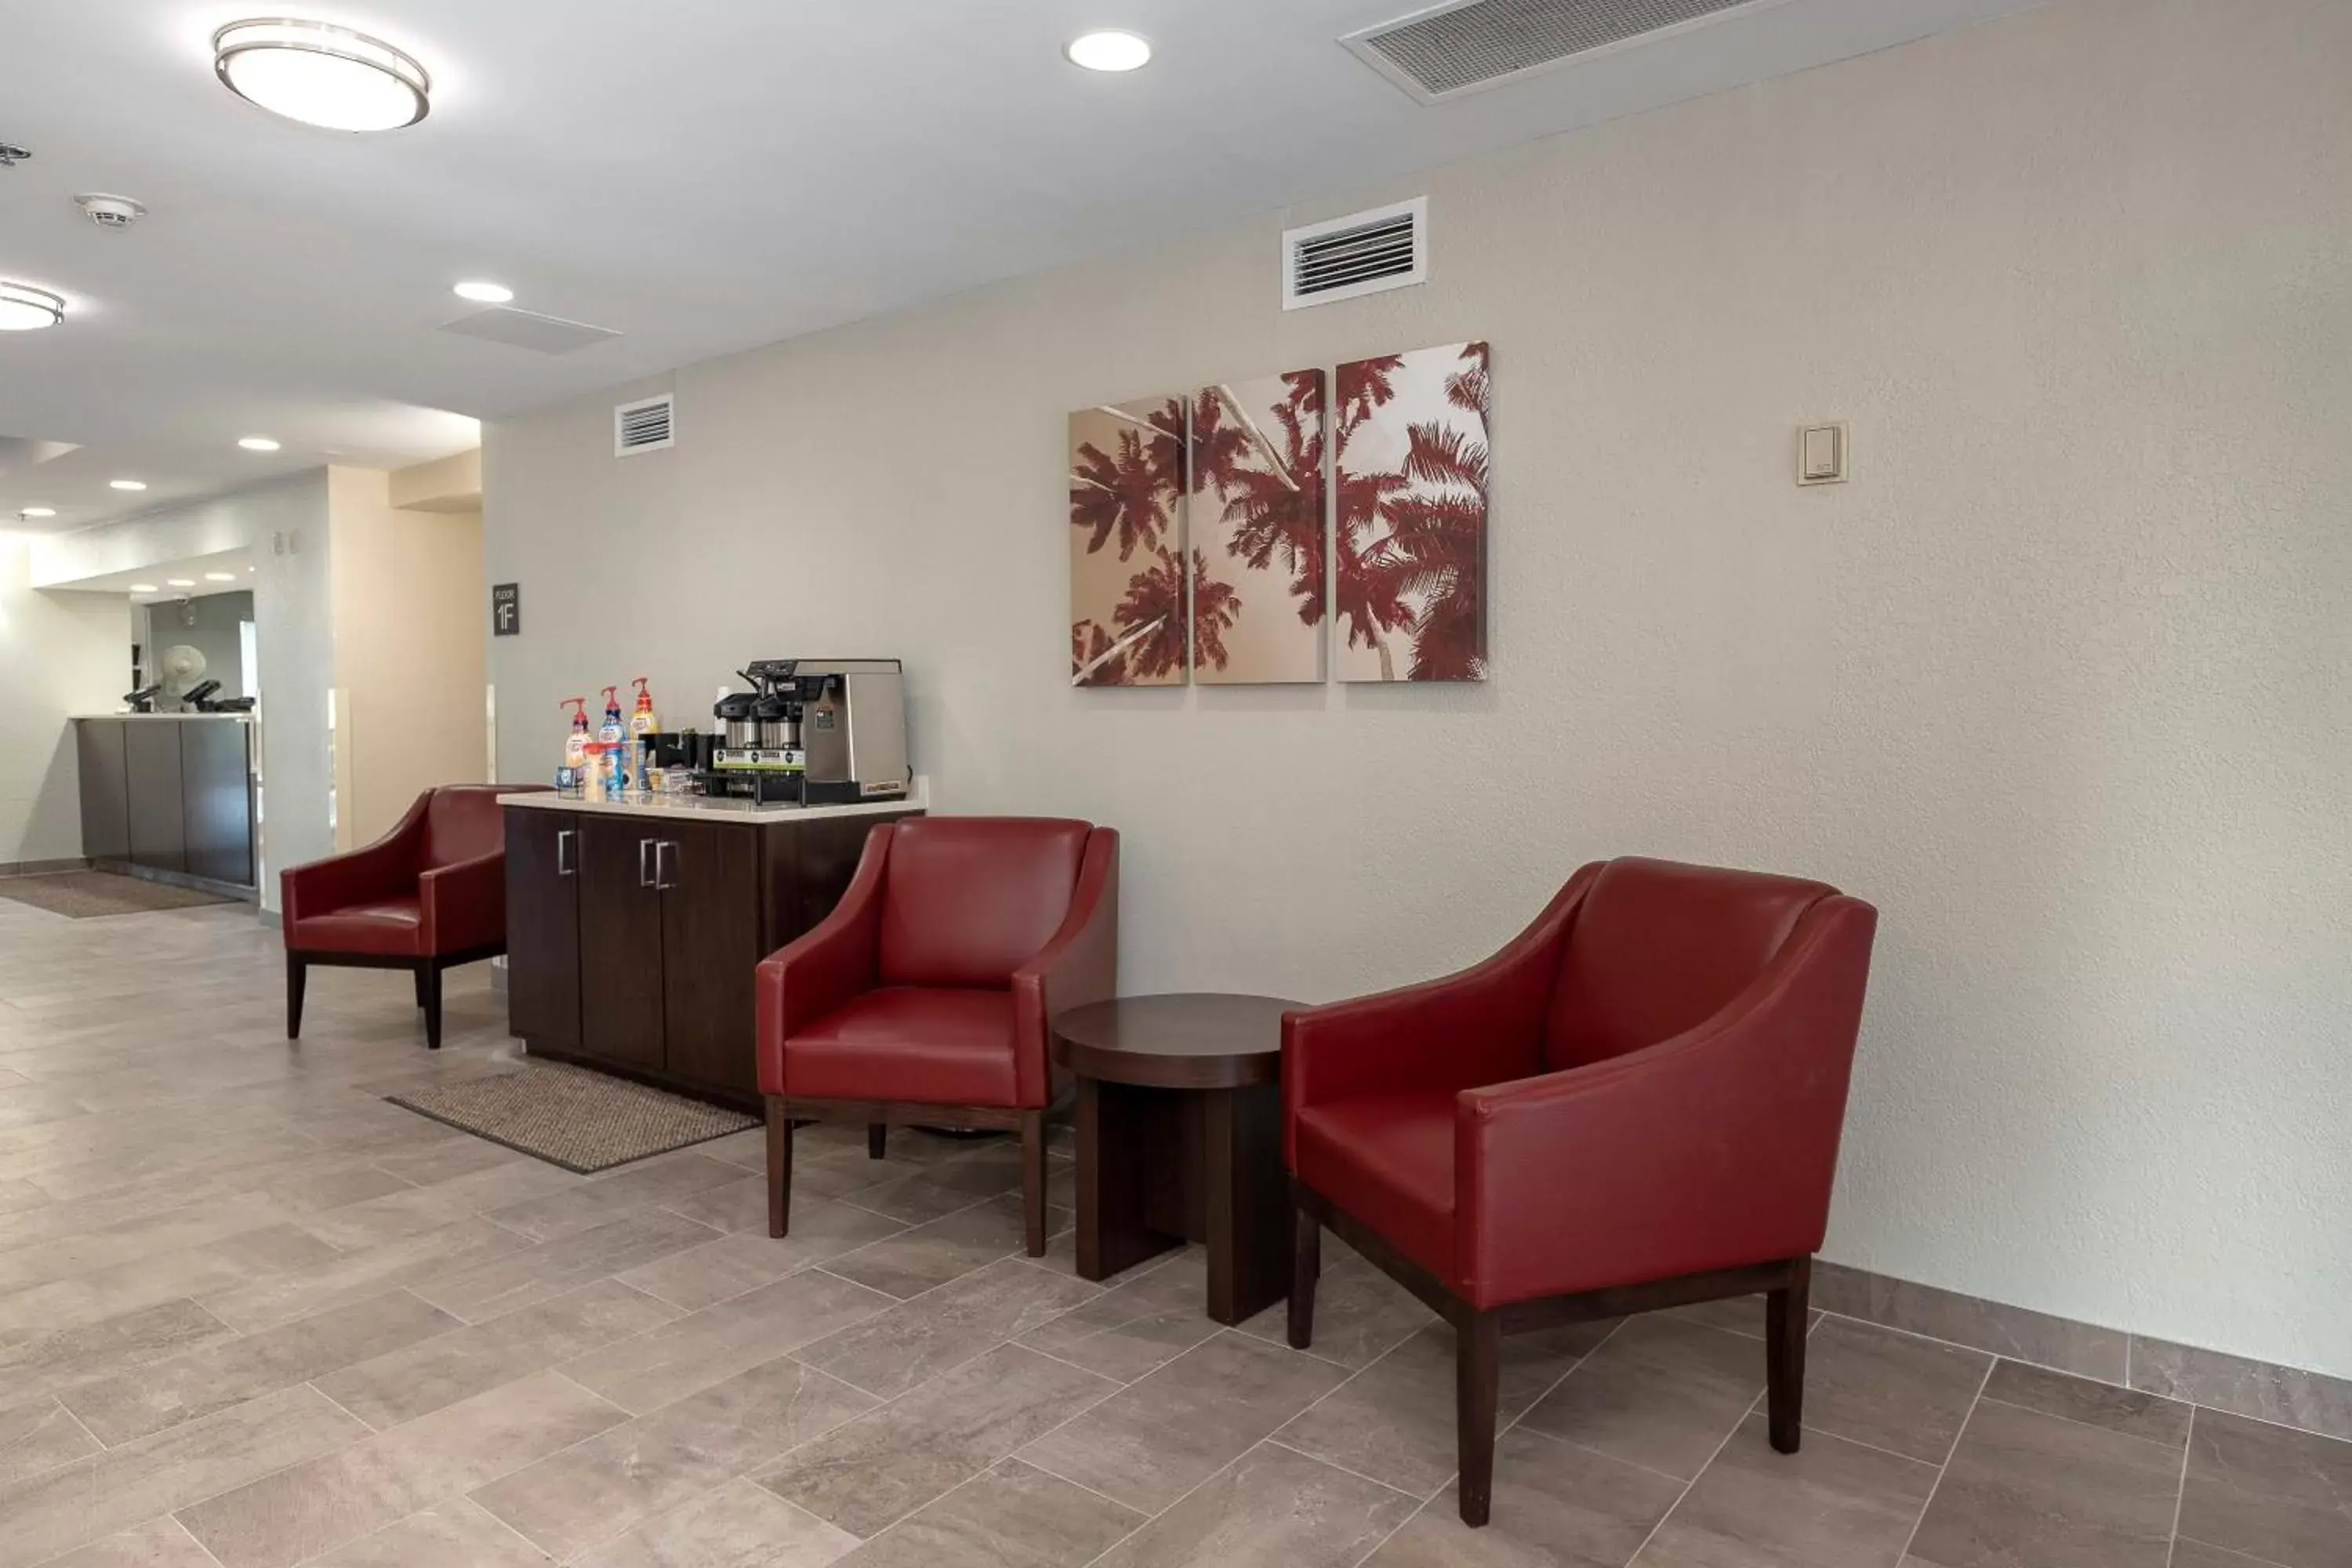 Lobby or reception, Seating Area in Red Roof Inn PLUS+ Jacksonville – Southpoint